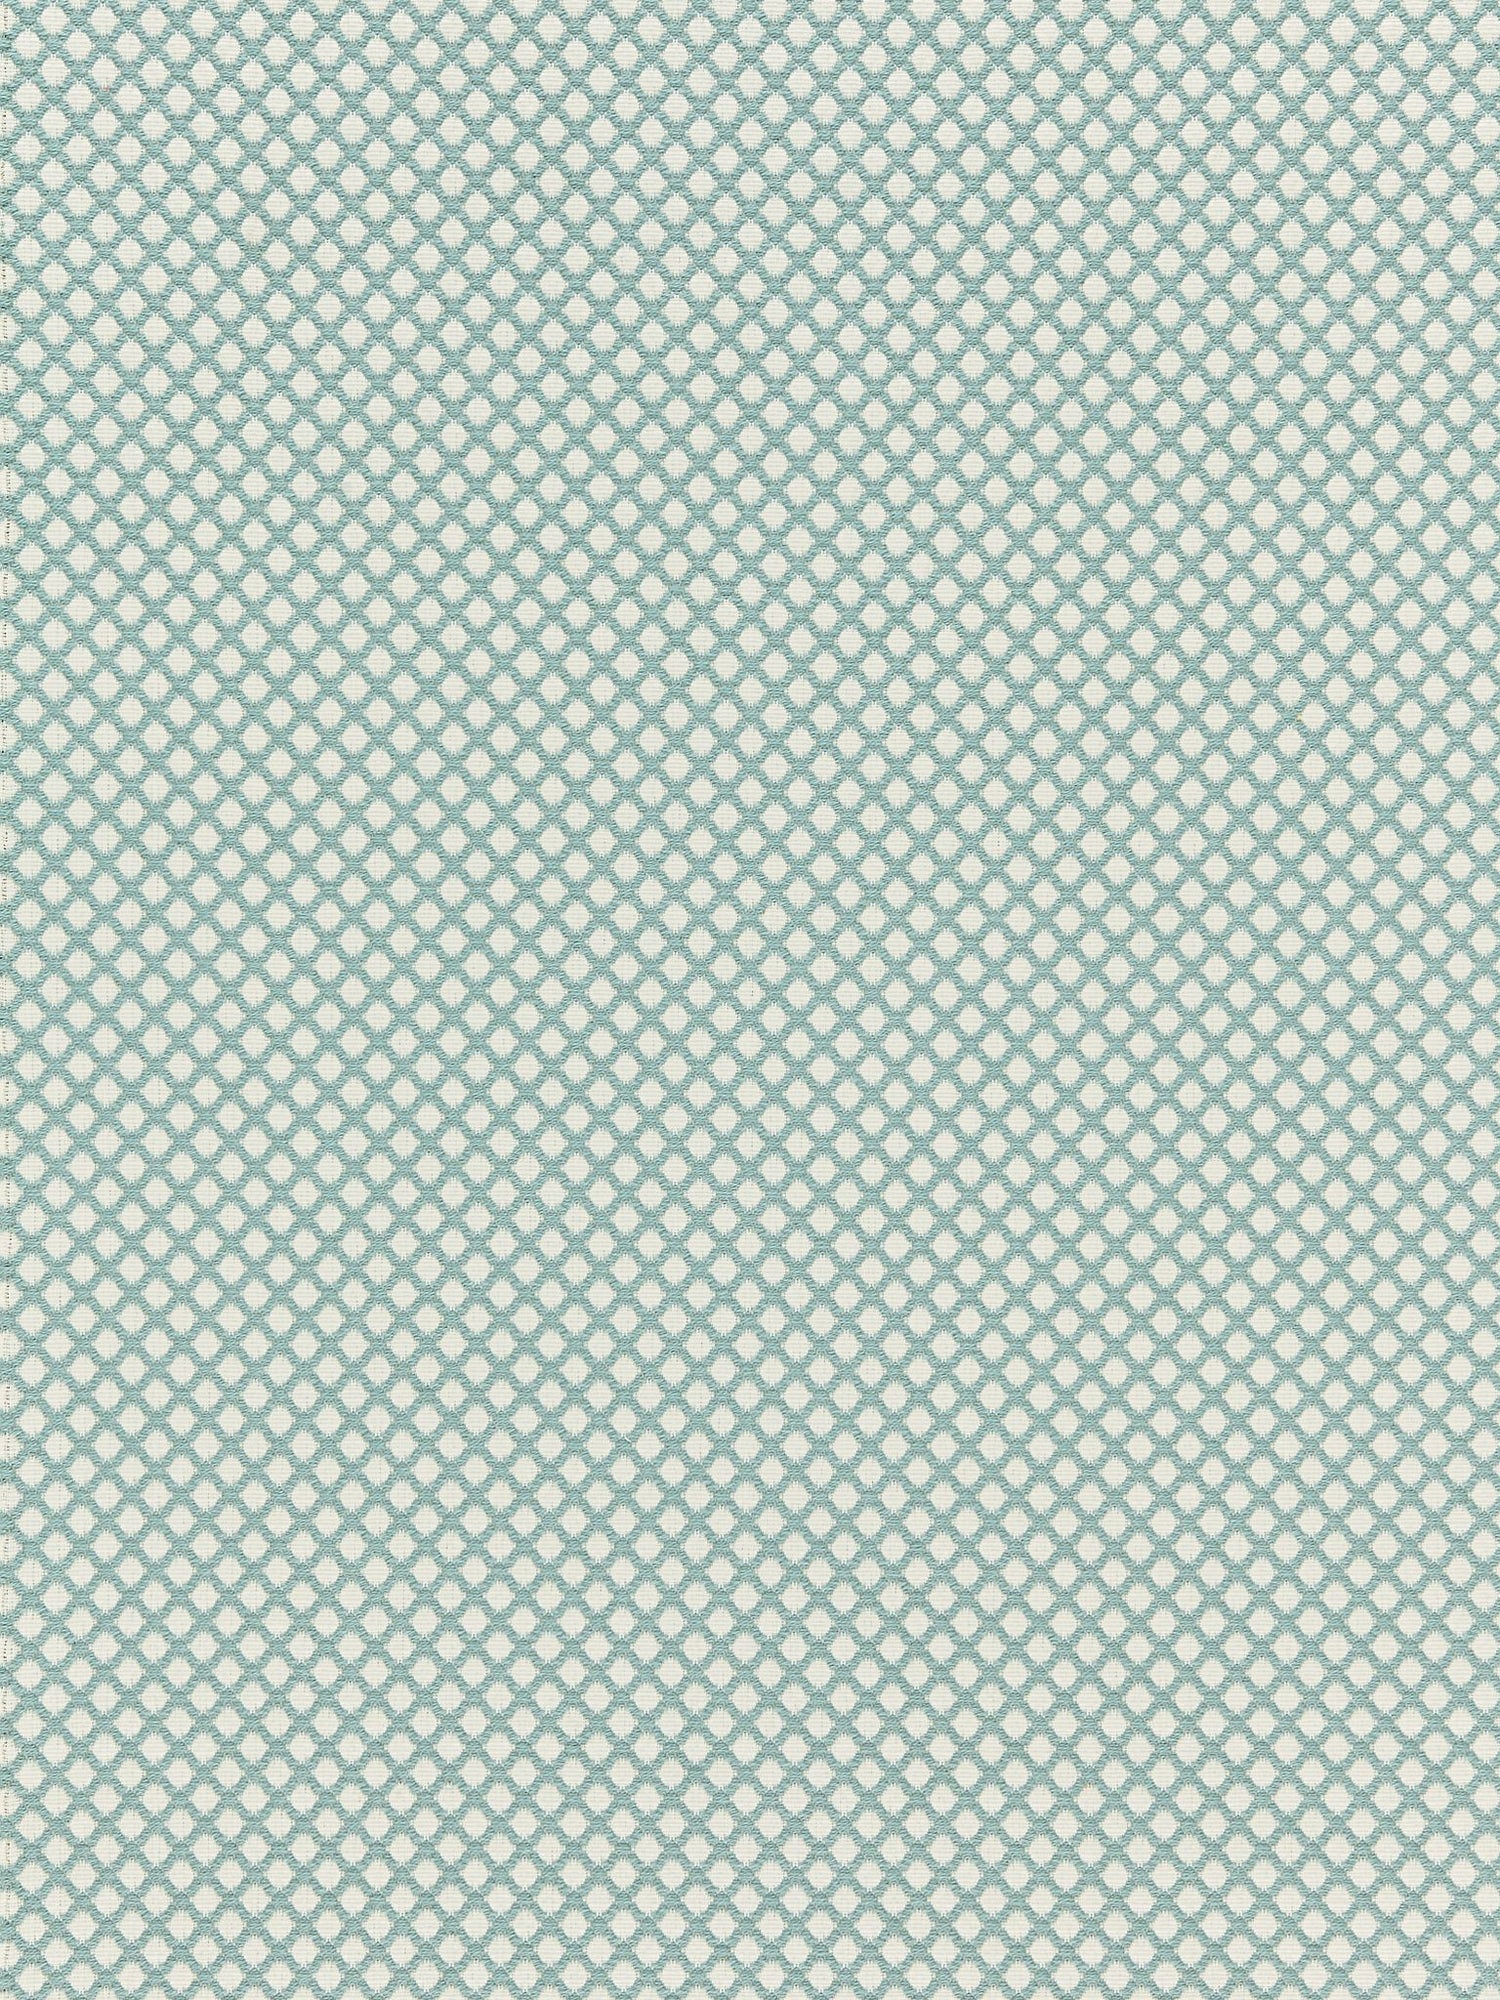 Bellaire Trellis fabric in mineral color - pattern number BK 0002K65121 - by Scalamandre in the Old World Weavers collection